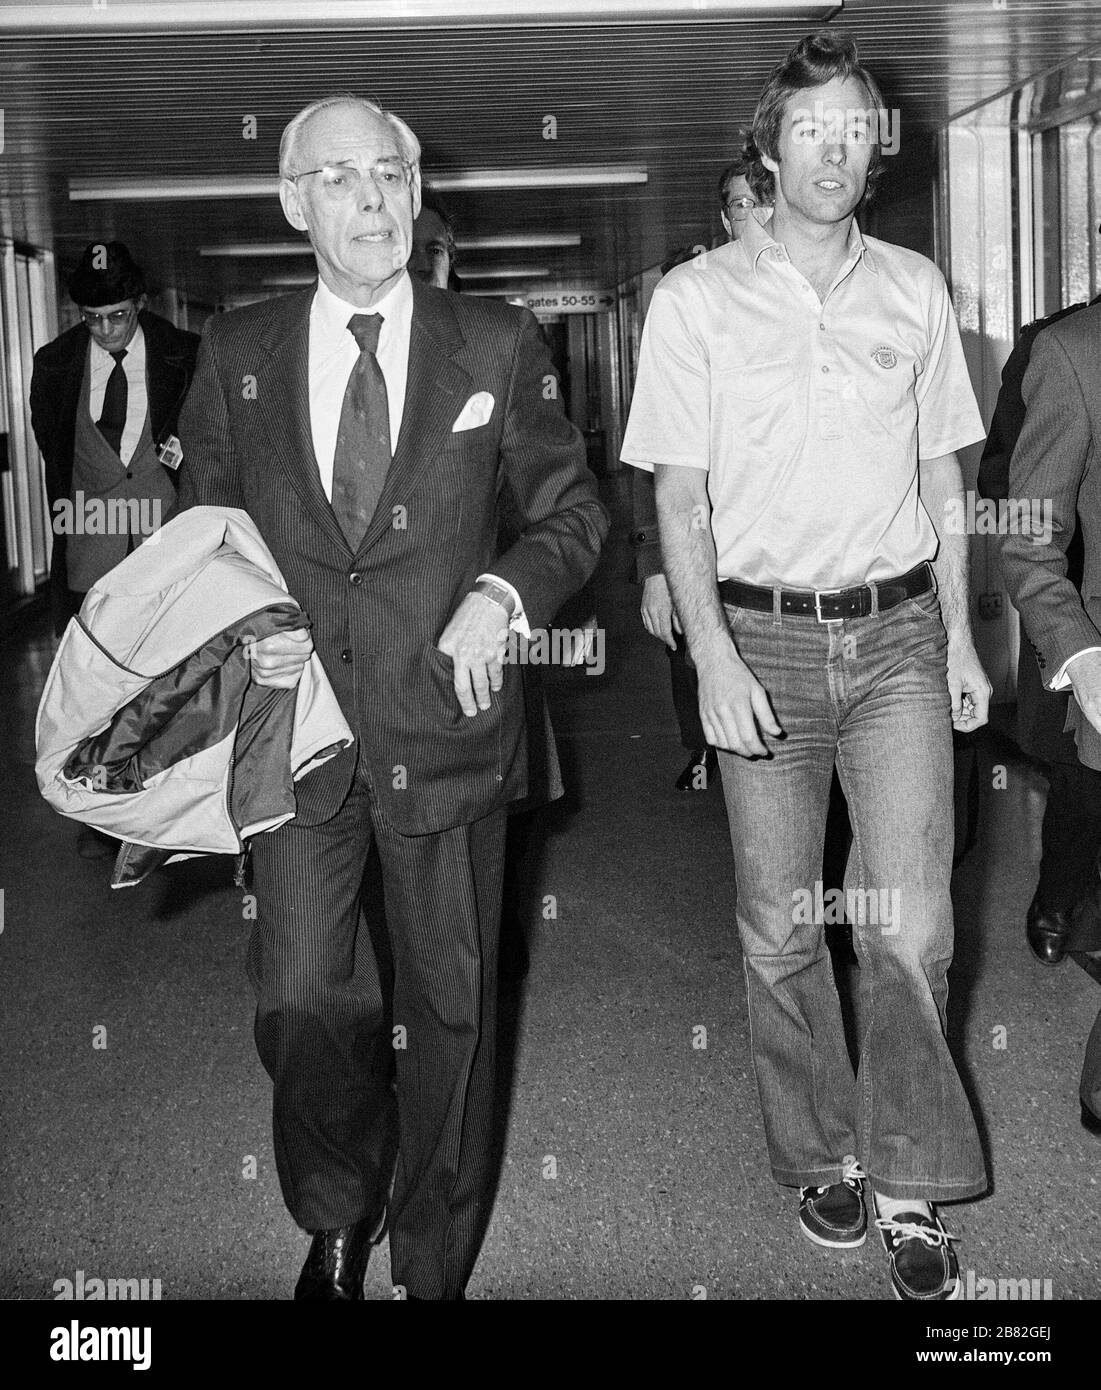 Denis Thatcher with his son Mark arriving at London's Heathrow Airport in January 1982. Stock Photo